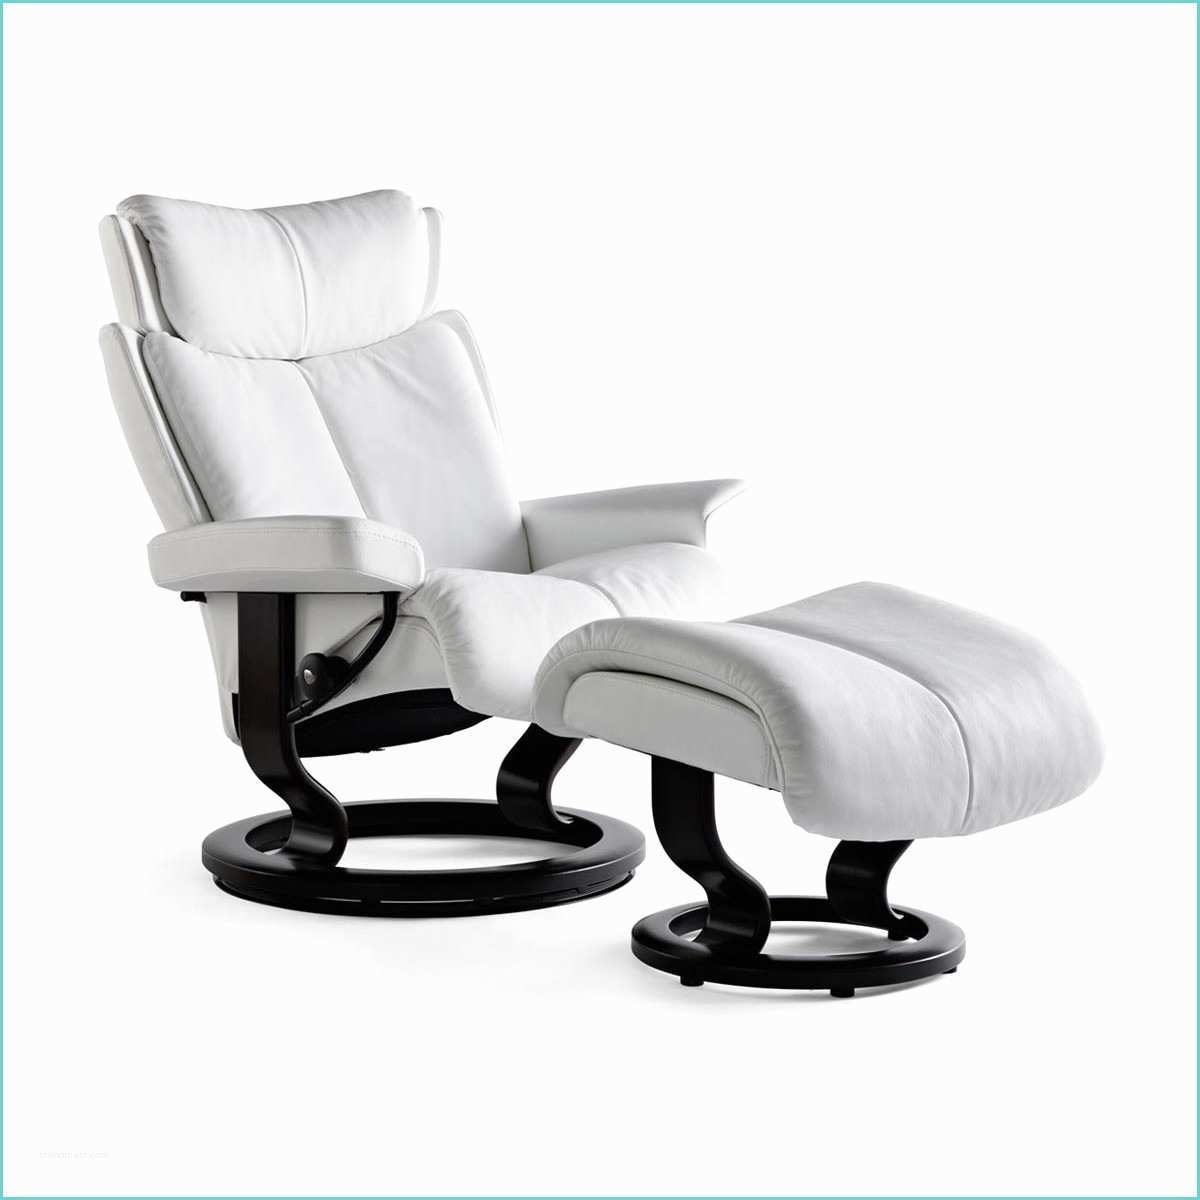 Stressless Magic Chair Review Stressless Magic Small Recliner & Ottoman From $3 295 00